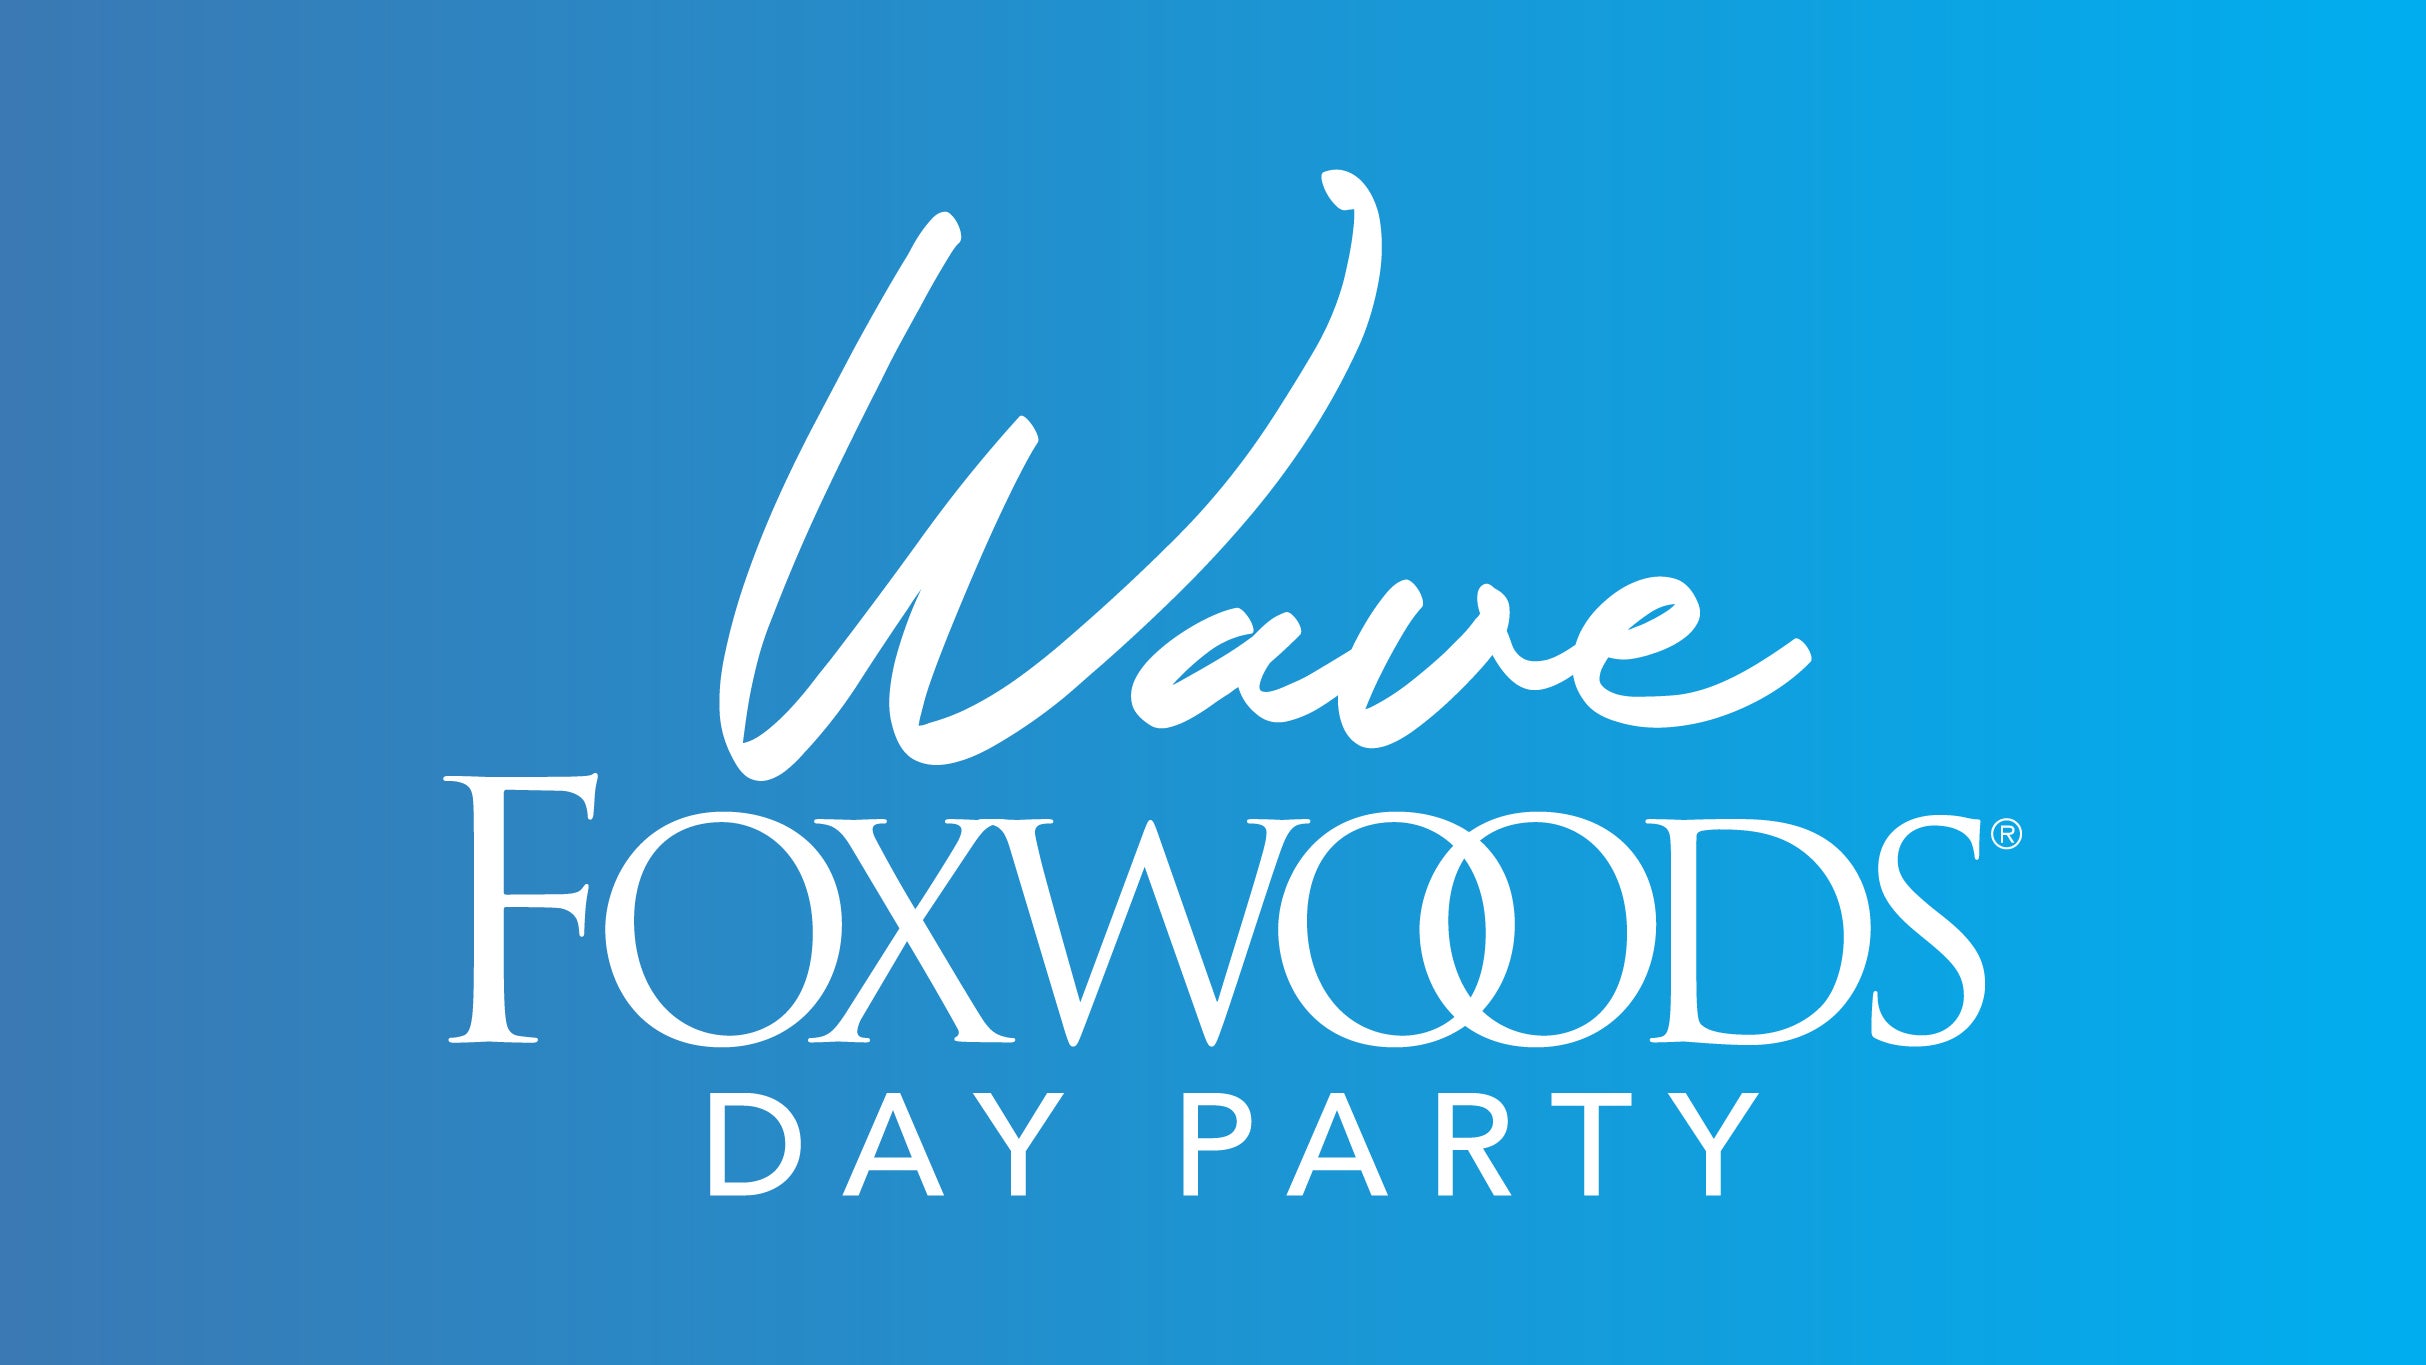 WAVE - Foxwoods Day Party: Sundays at Foxwoods in Mashantucket promo photo for BLG presale offer code